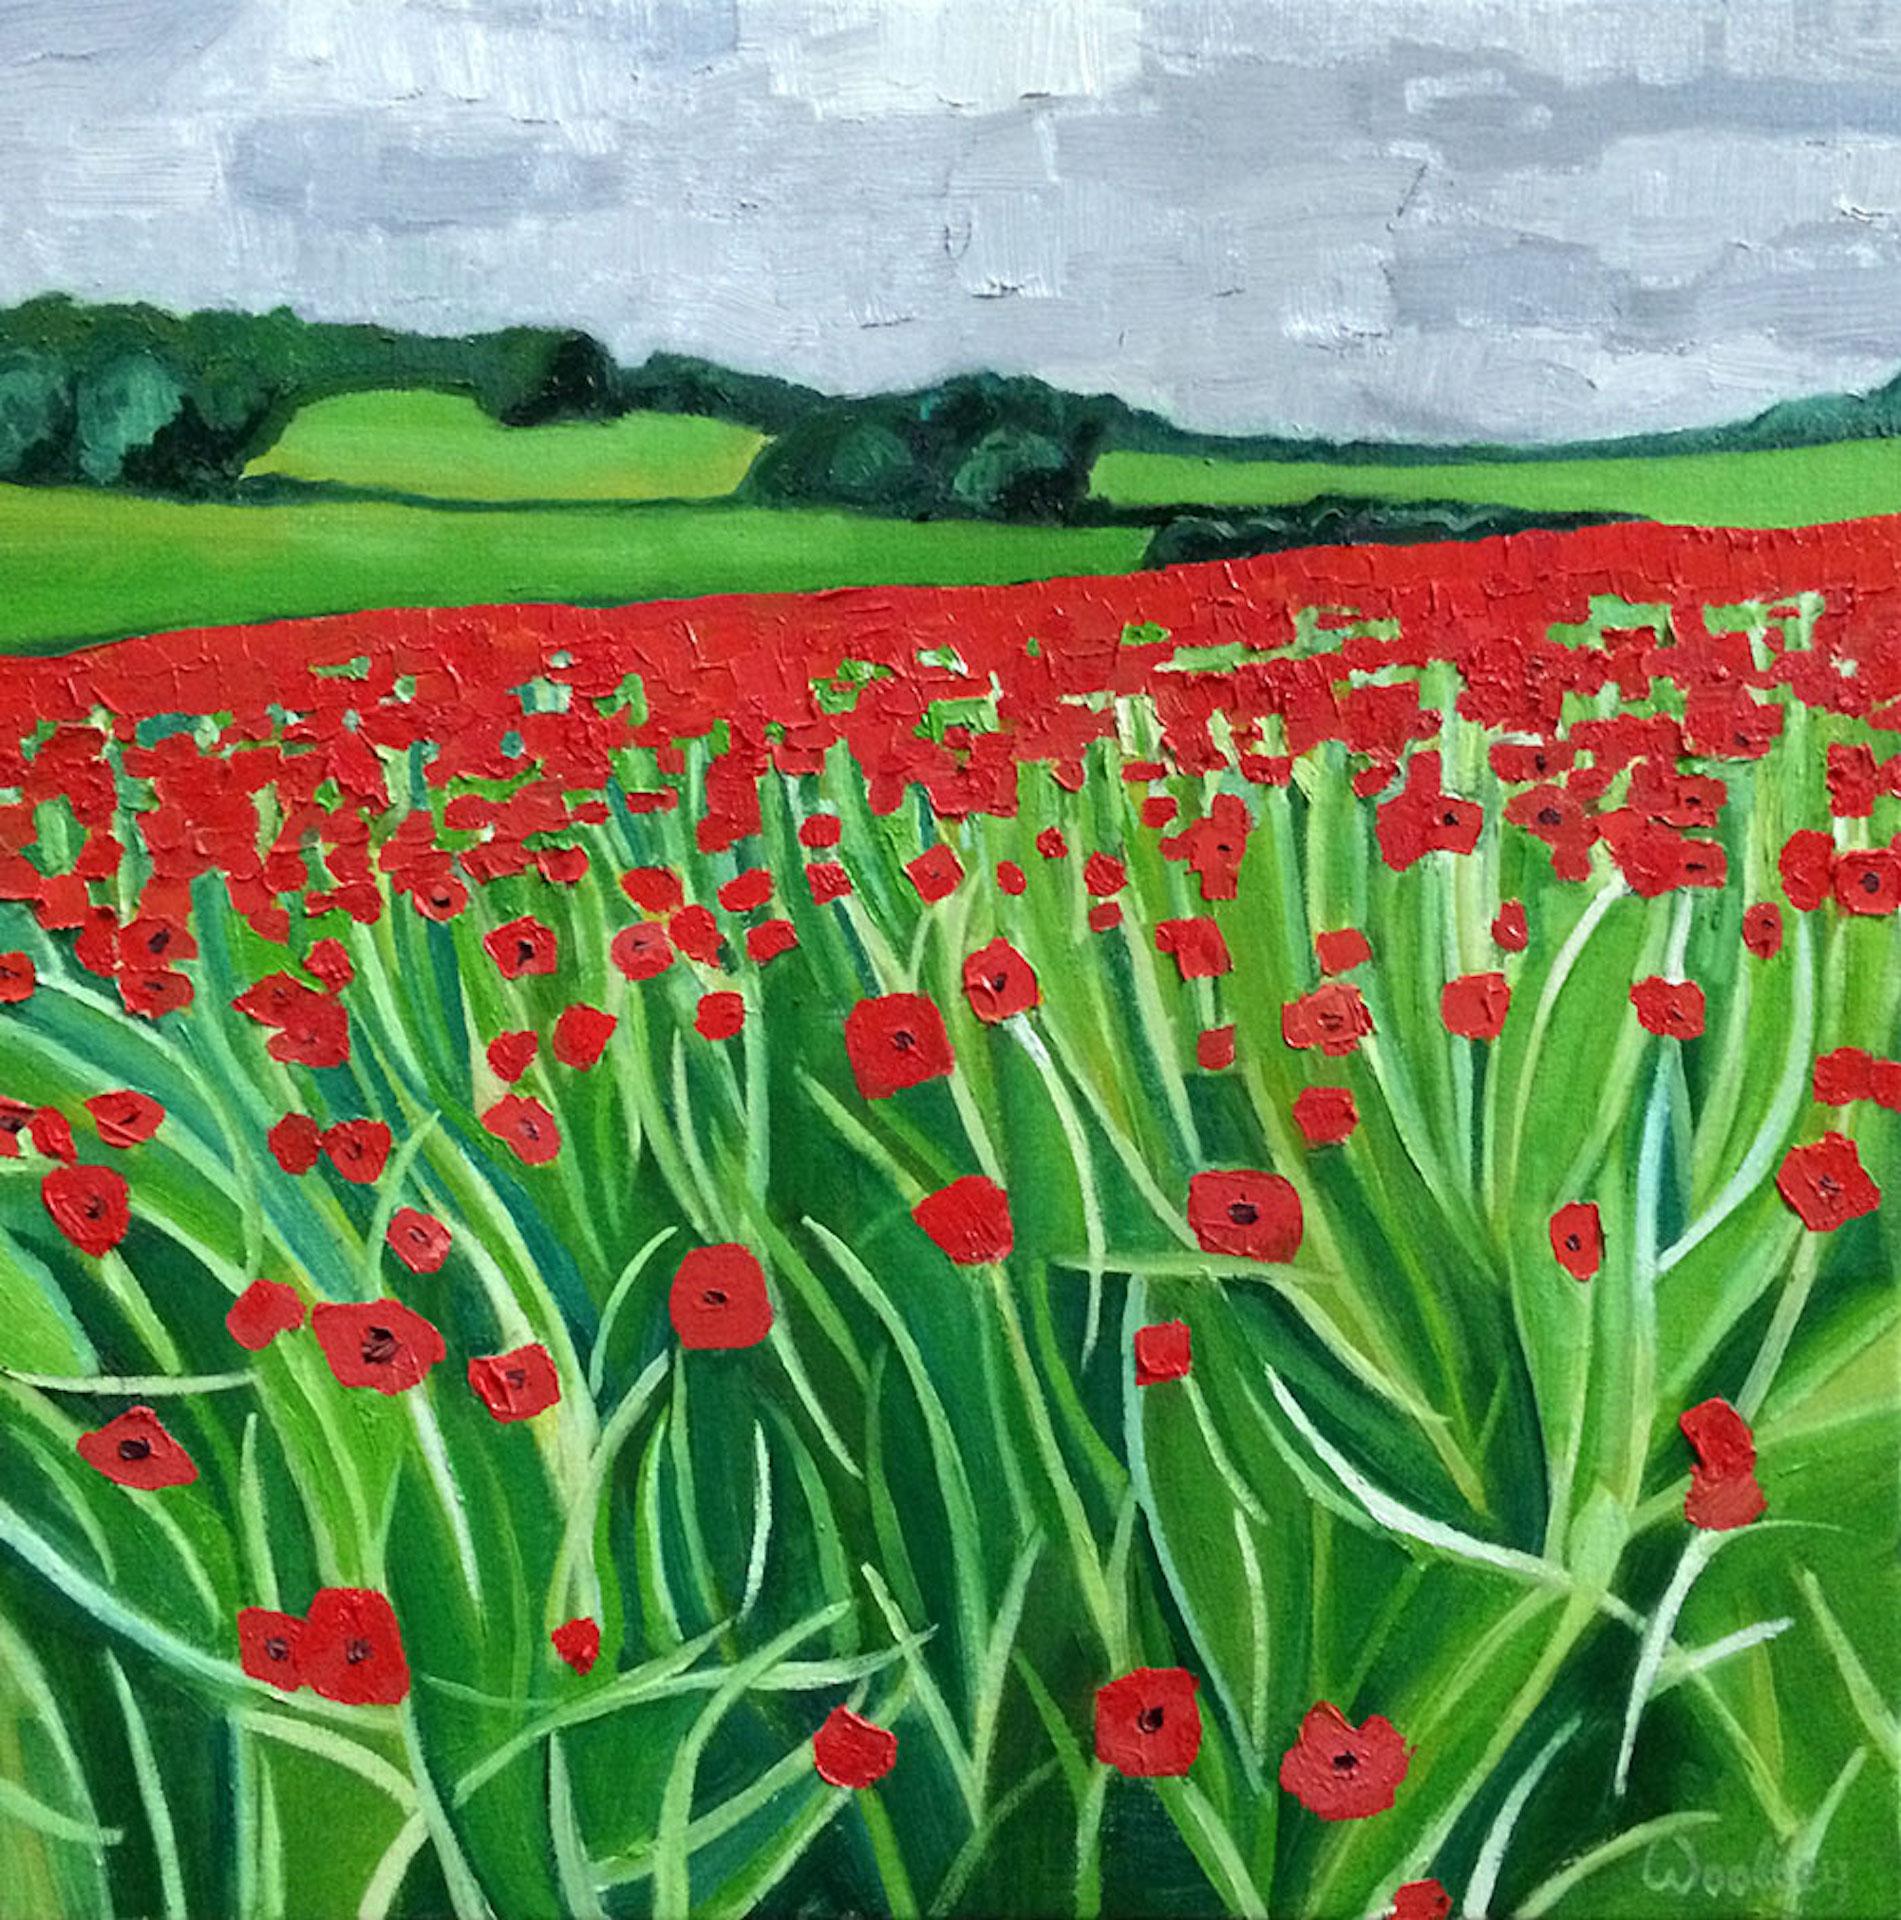 Eleanor Woolley
Cotswold Poppies
Original Painting
Oil Paint on Canvas
Canvas Size: H 50cm x W 50cm x D 2cm
Signed
Sold Unframed
Ready to Hang
(Please note that in situ images are purely an indication of how a piece may look).

Inspired by the